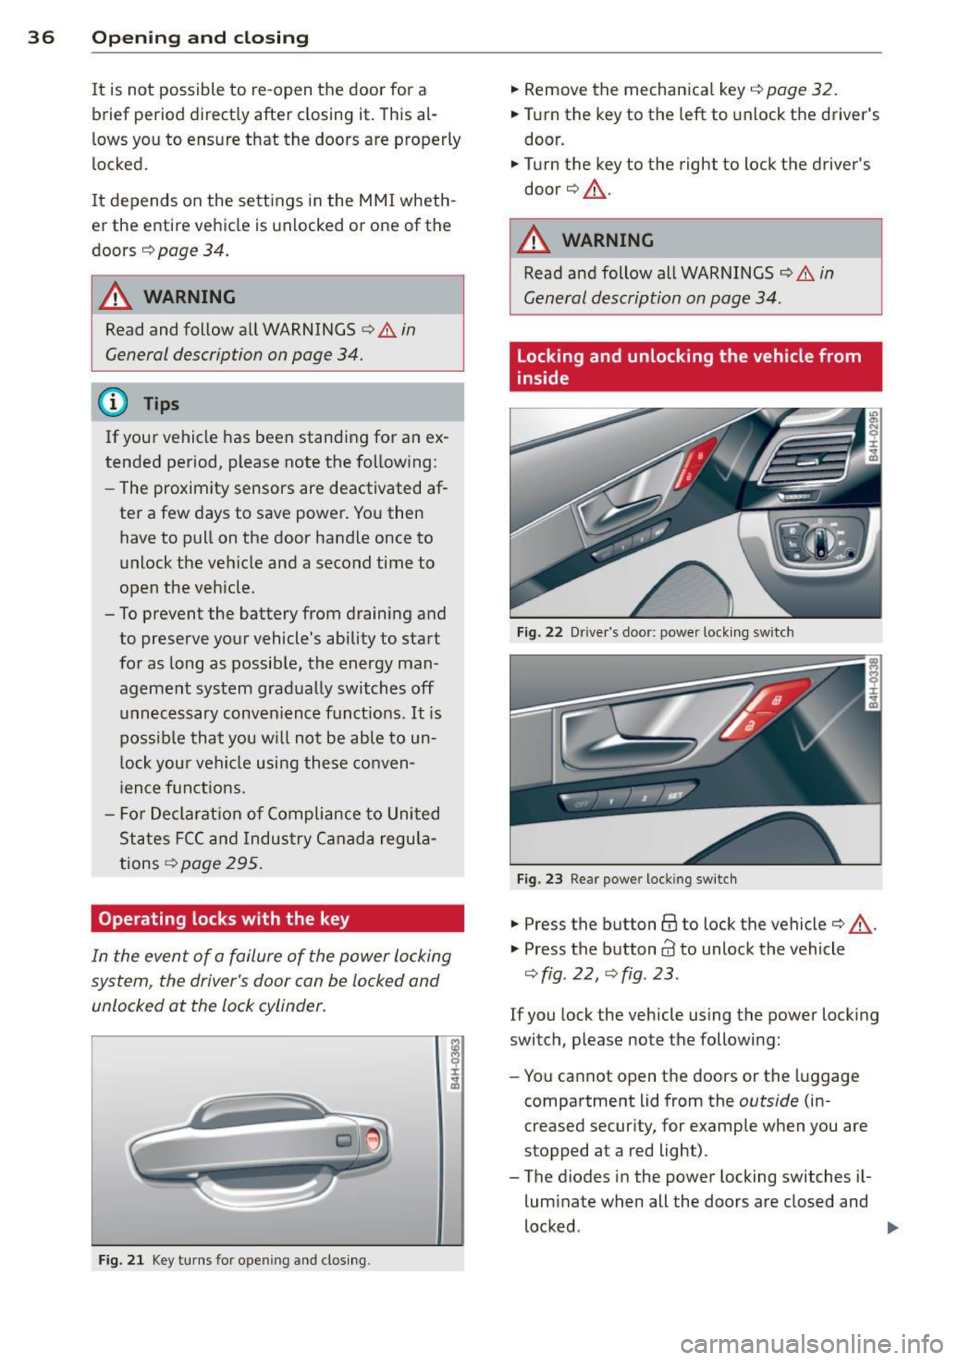 AUDI S8 2014 Owners Guide 36  Opening and  clo sing 
It  is not  possible  to  re-open  the  door  for  a 
brief  period  direct ly after  closing  it. This  al­
l ows  you  to  ensure  that  the  doors  are  properly 
locked